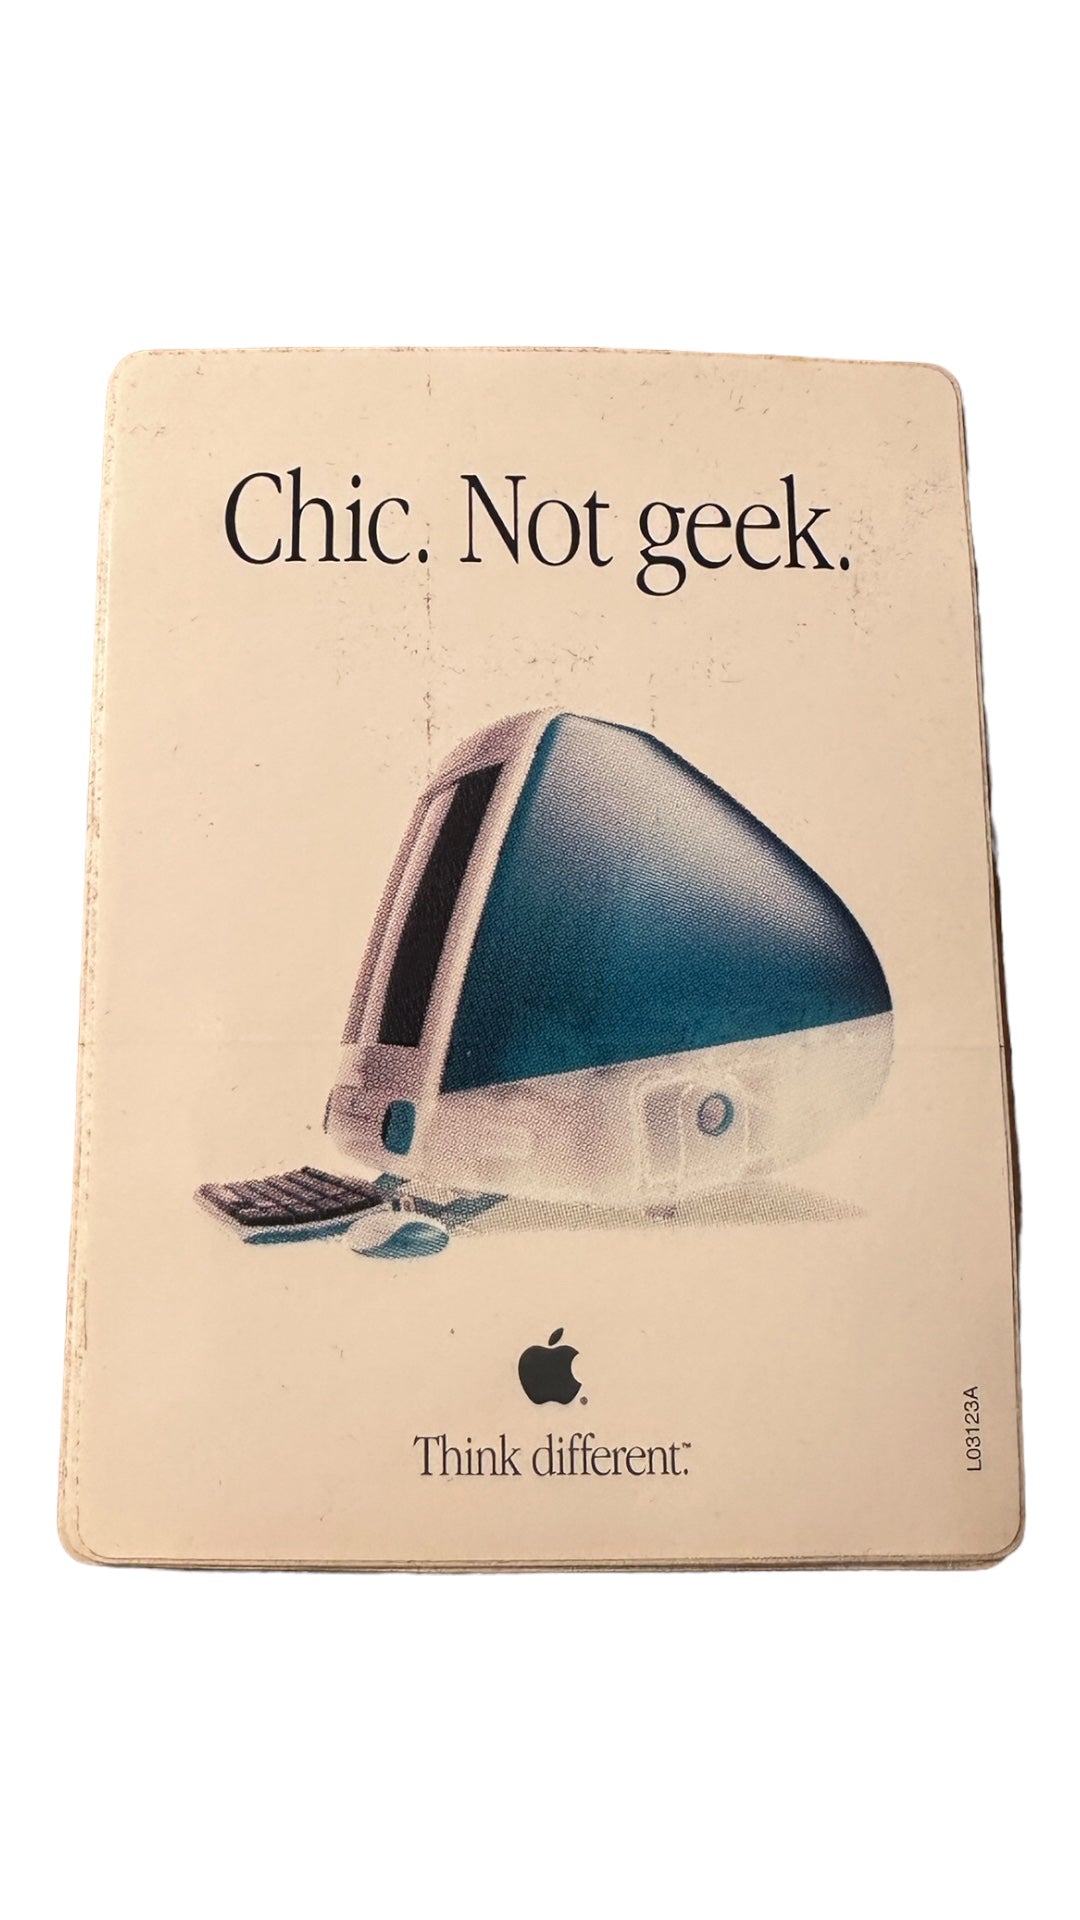 VTG 4x3 IMac G3 Chic, Not Geek Promo Decal Stickers